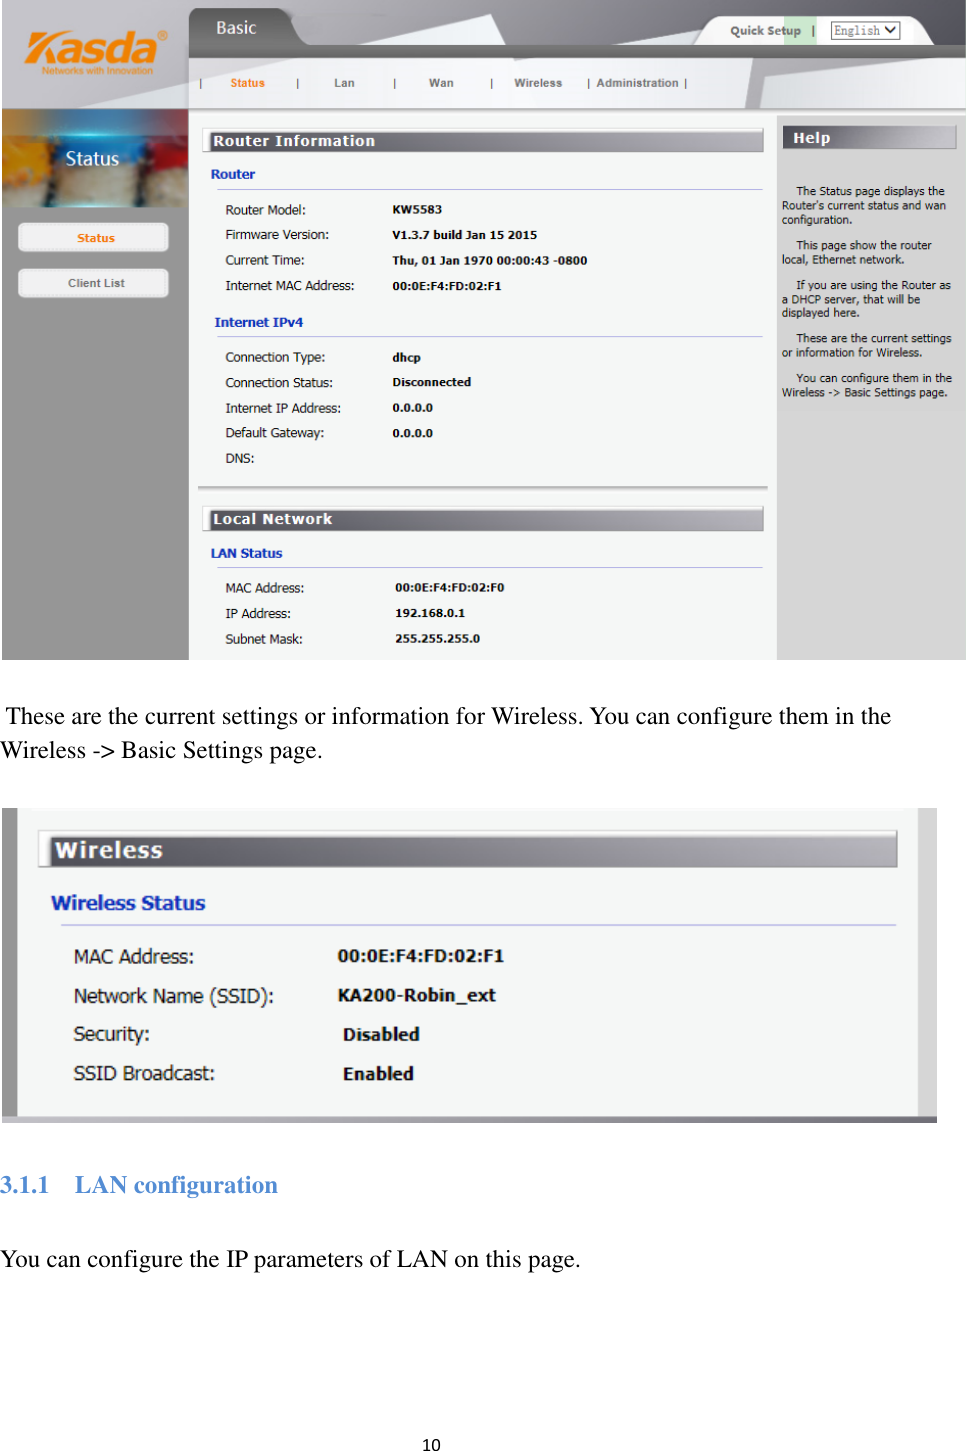                                                               10                                                       These are the current settings or information for Wireless. You can configure them in the Wireless -&gt; Basic Settings page.  3.1.1  LAN configuration You can configure the IP parameters of LAN on this page. 